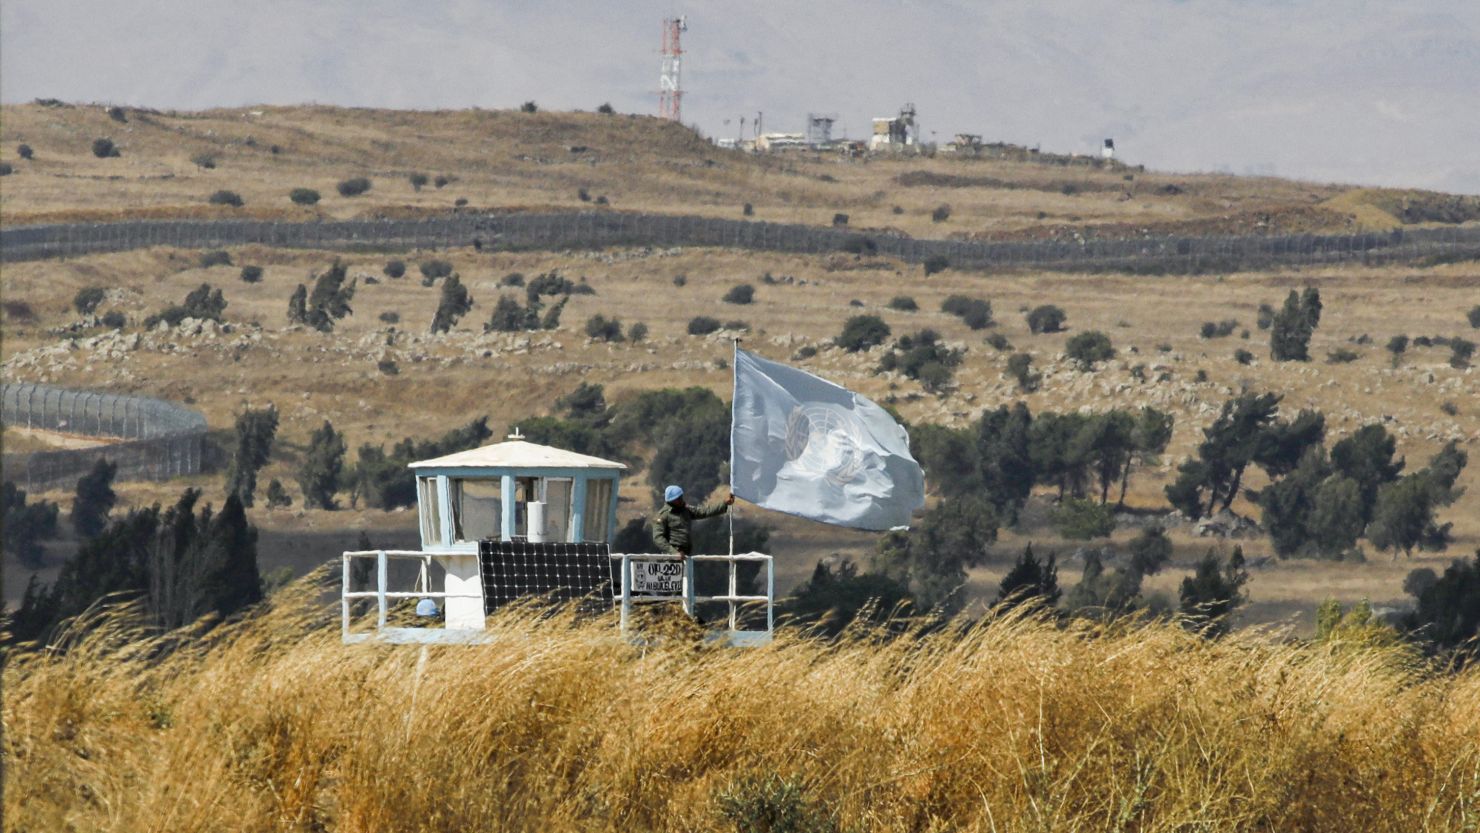 A UN peacekeeper stands on duty at an outpost of the United Nations Disengagement Observer Force (UNDOF) buffer zone between Syria and the Israeli-occupied Golan Heights on August 11, 2020.